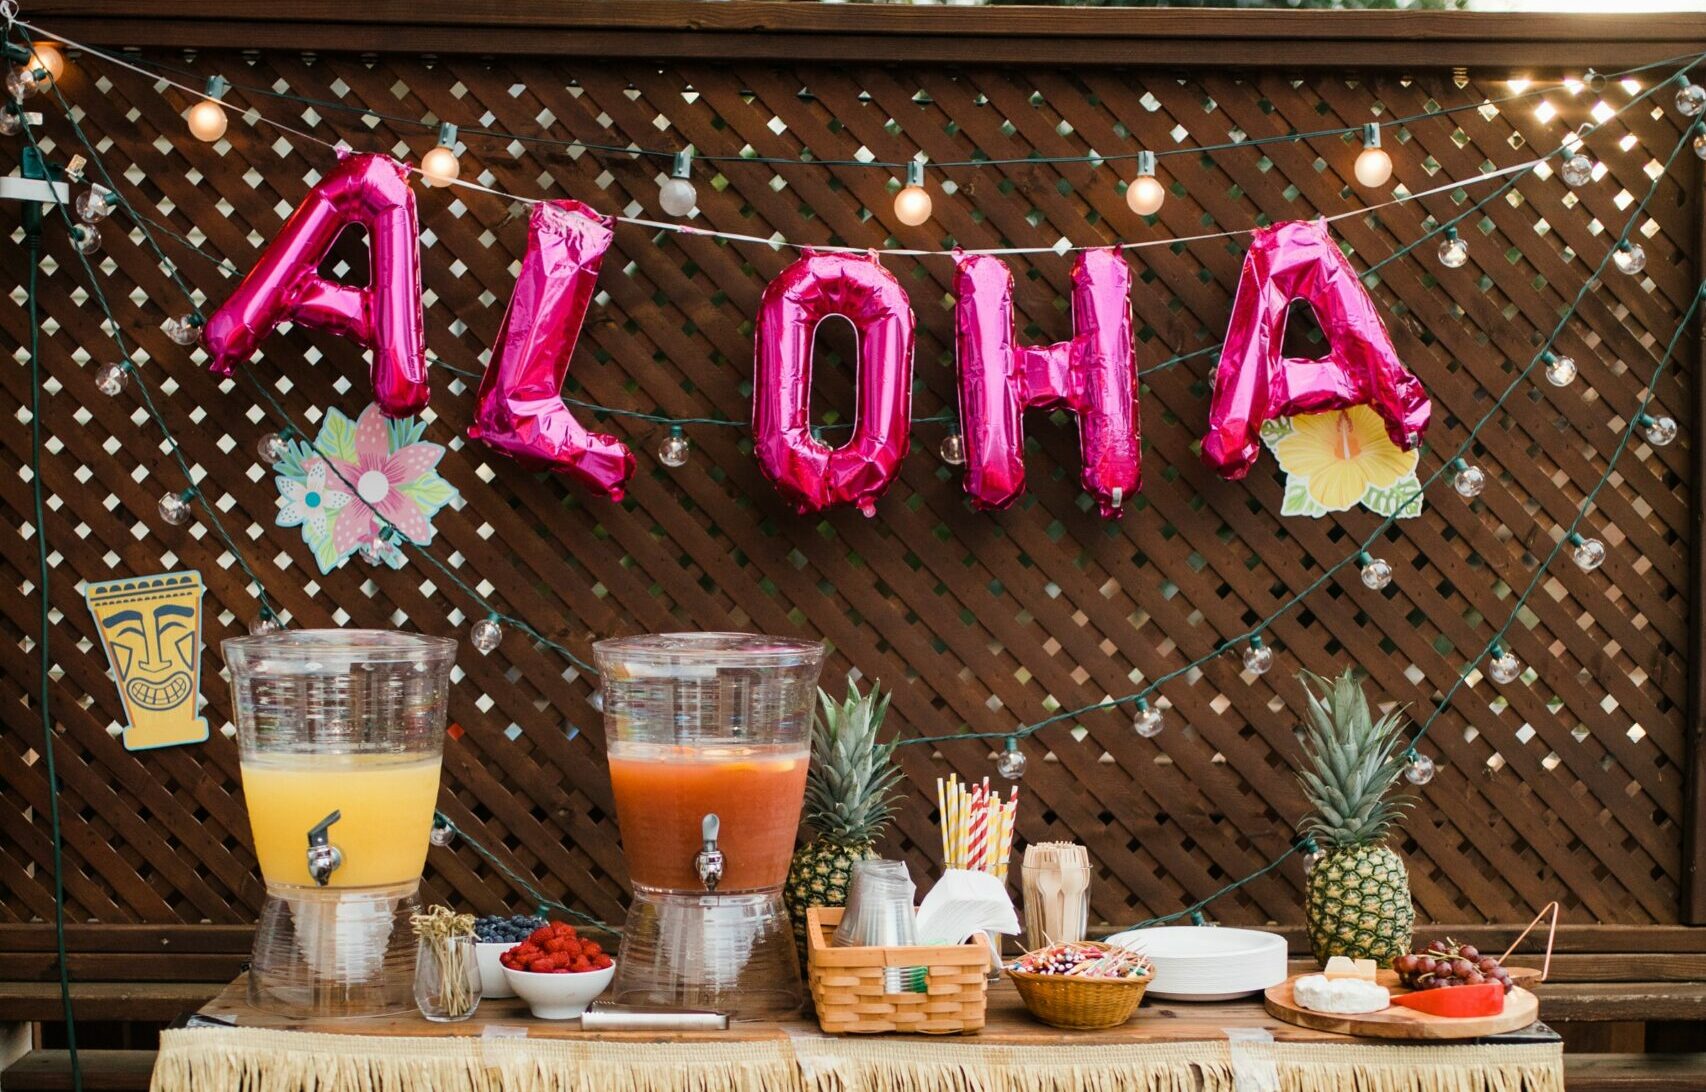 Balloons spell out the word 'Aloha" at a backyard luau